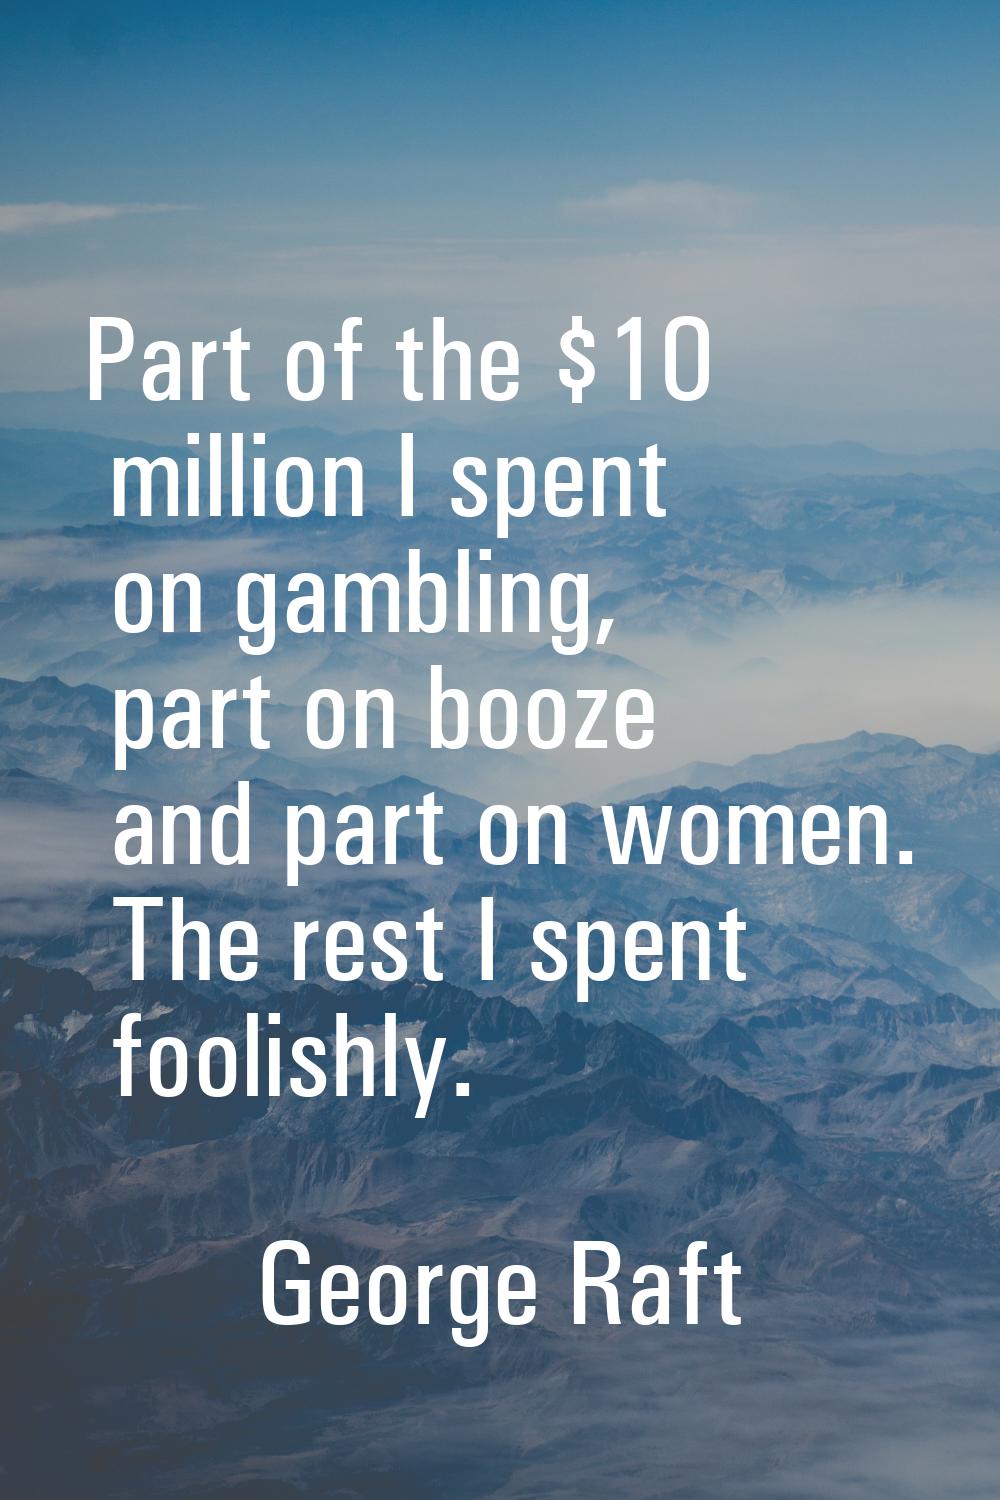 Part of the $10 million I spent on gambling, part on booze and part on women. The rest I spent fool